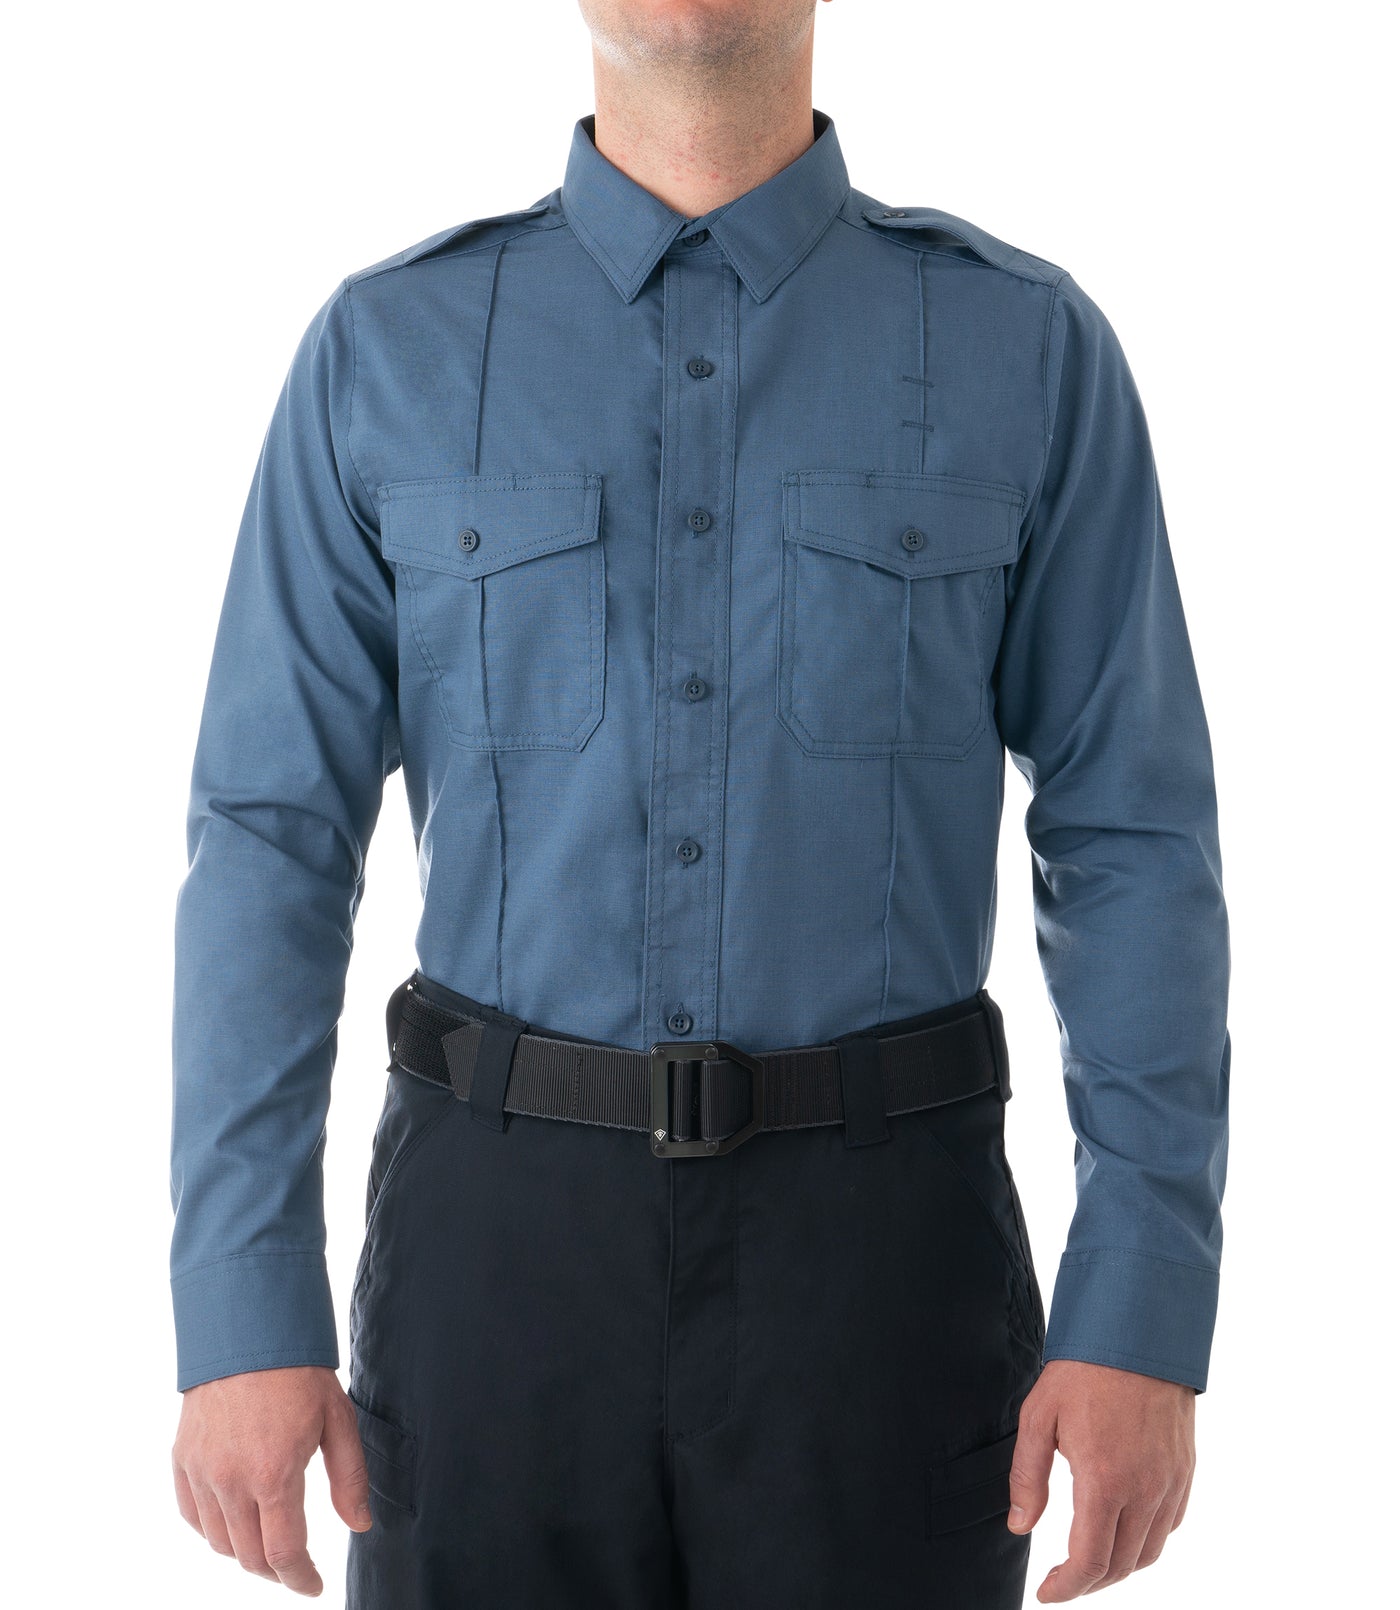 Front of Men's Pro Duty Uniform Shirt in French Blue